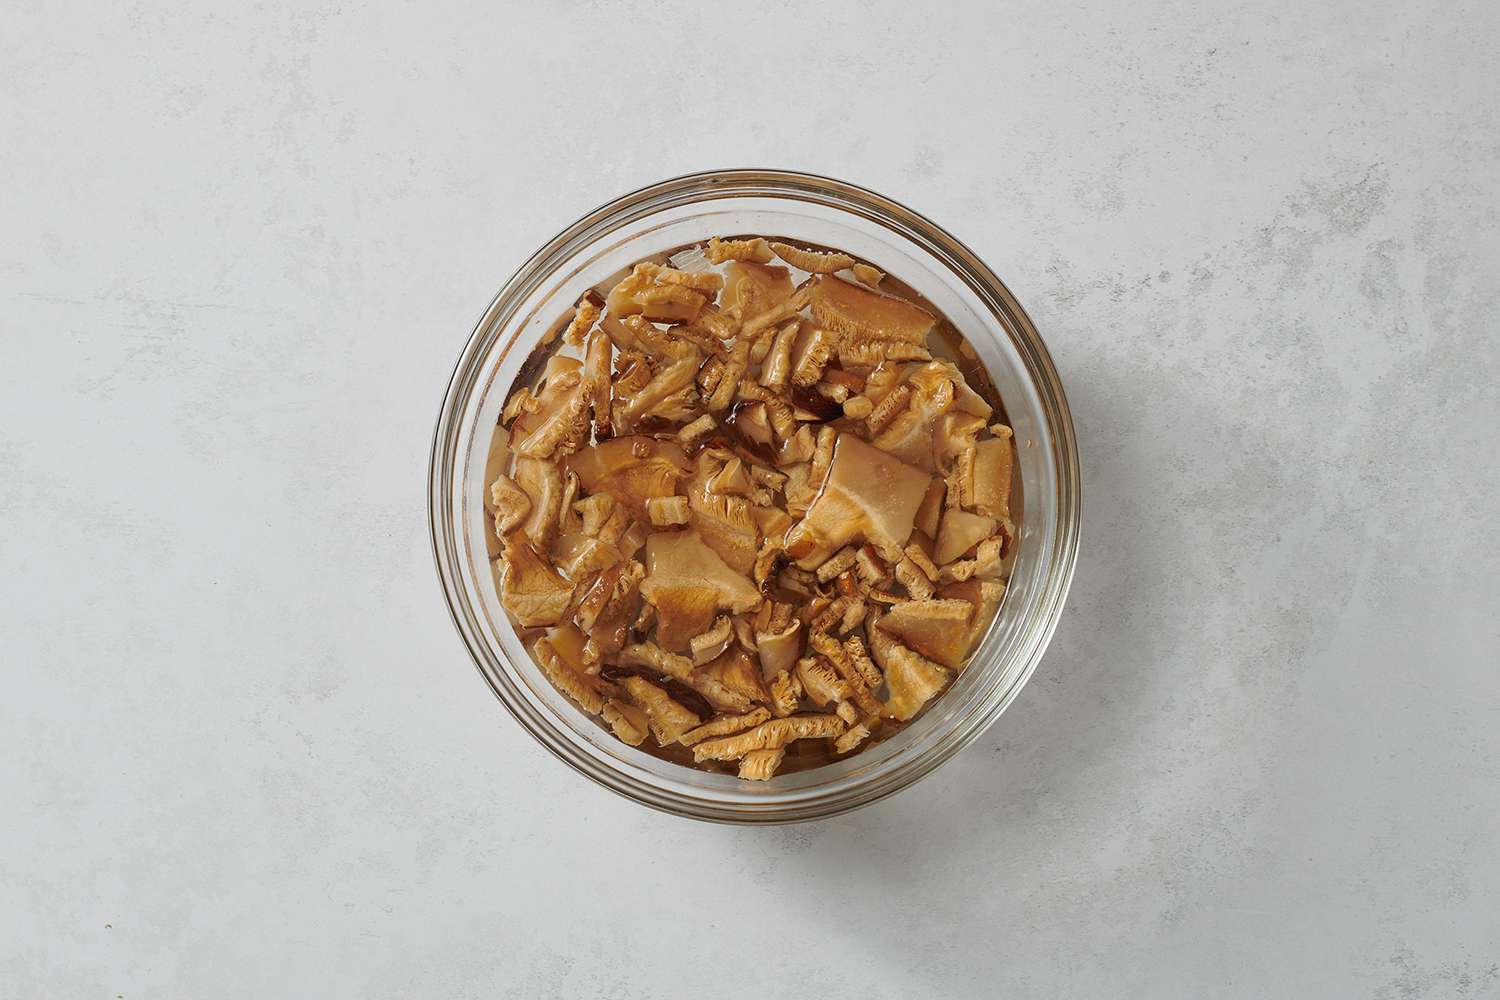 Dried mushrooms in a bowl of water